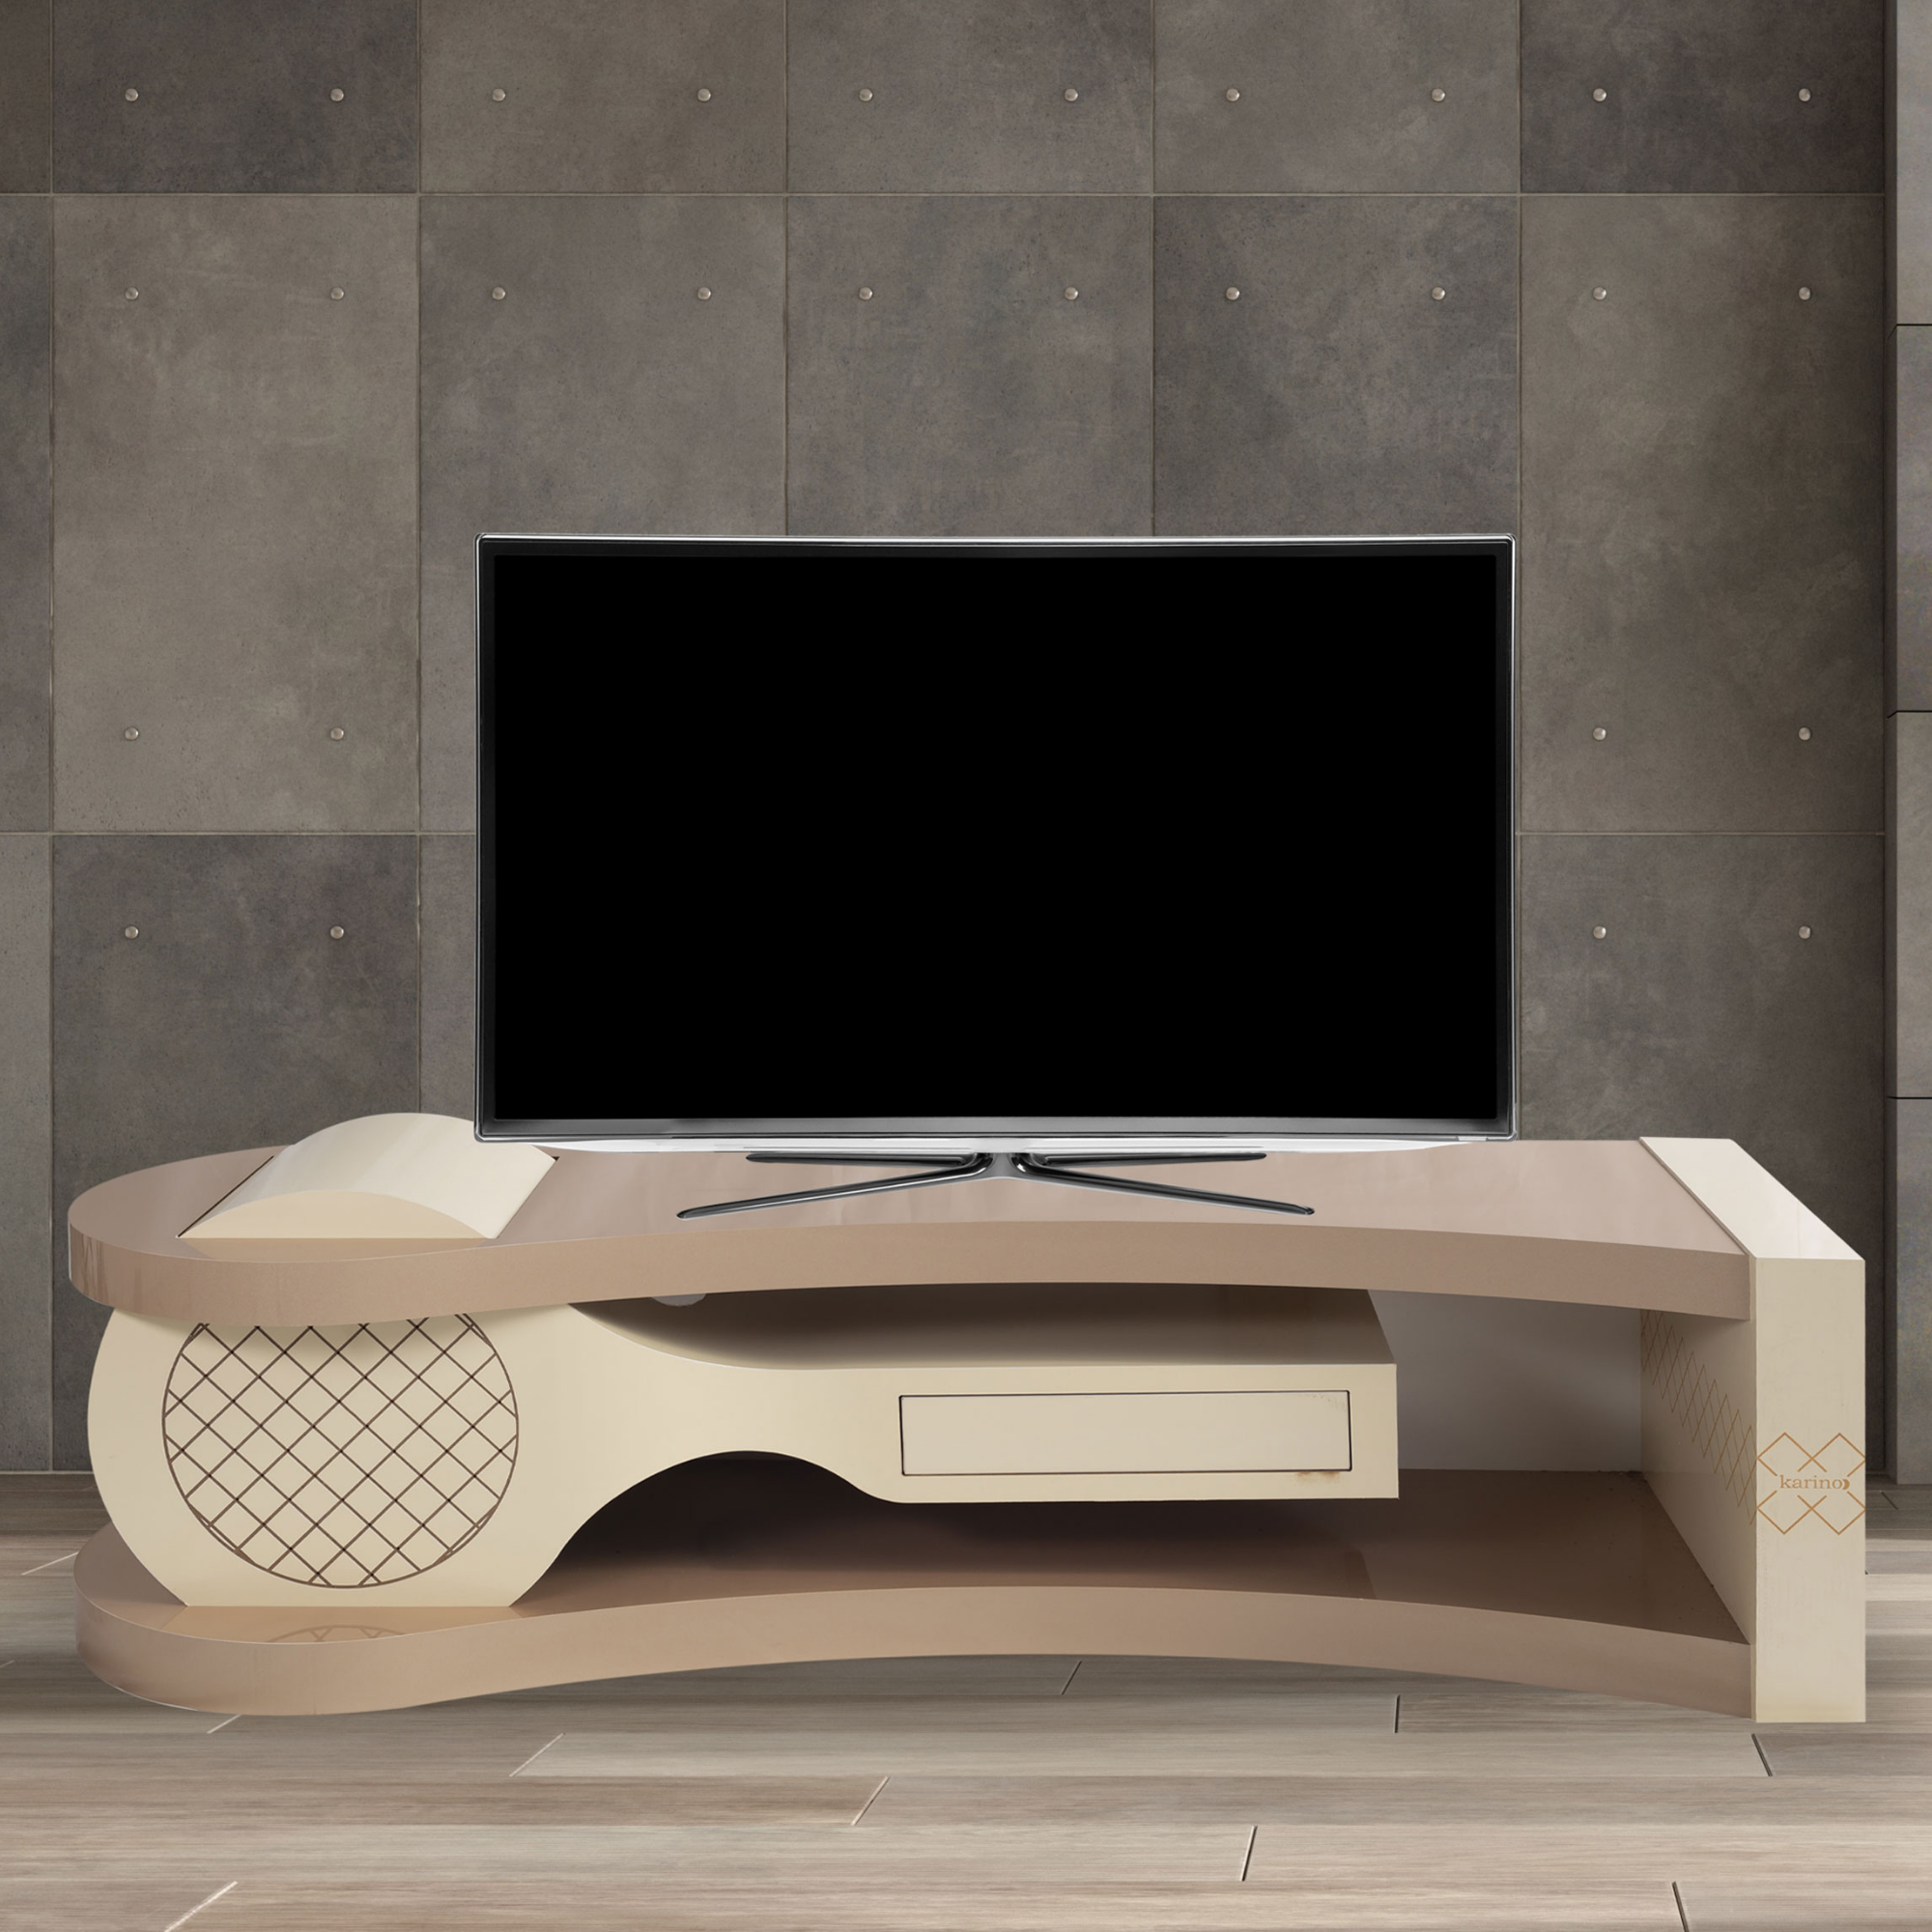 FULLY ASSEMBLED, TV STAND, TV UNIT, TV CONSOLE, MID-CENTURY MODERN ENTERTAINMENT CENTRE FOR FLAT SCREEN TV, CABLE BOX, GAMING CONSOLES, IN LIVING ROOM